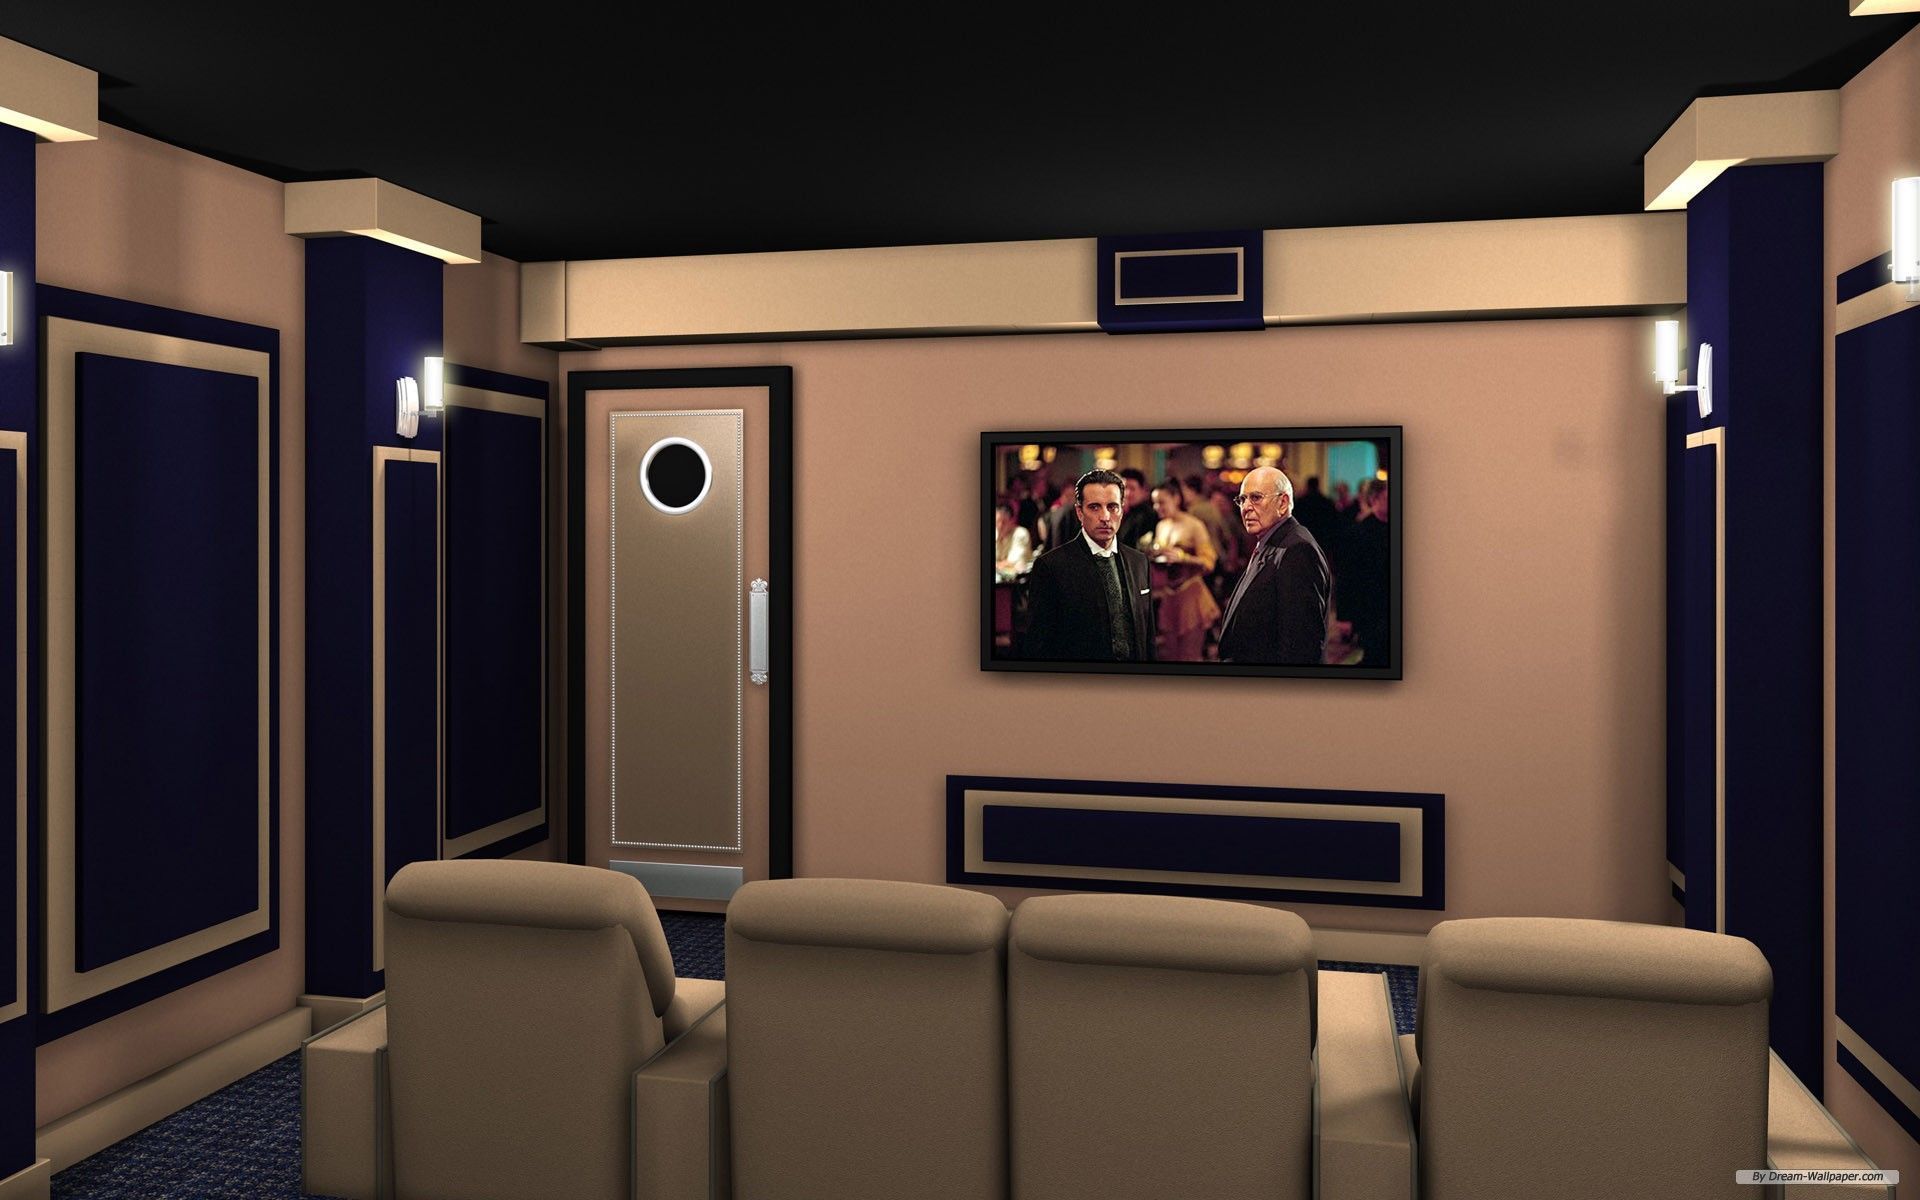 Free Wallpaper - Free Photography wallpaper - Home Theater